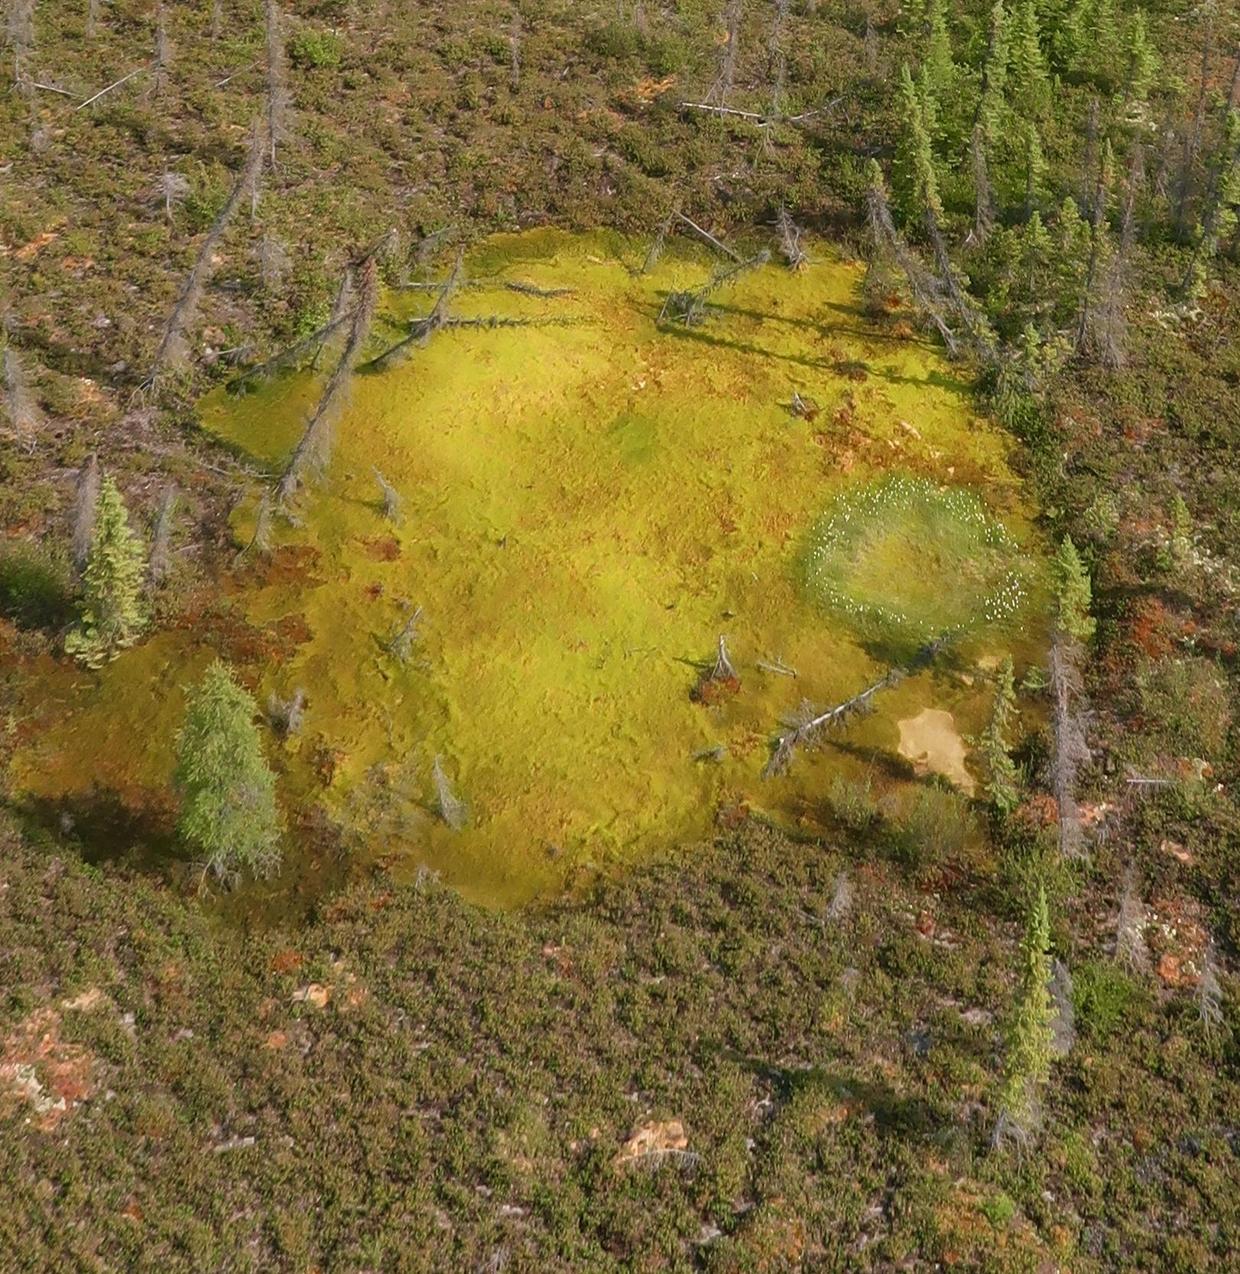 Aerial view of a sinkhole caused by rapid permafrost thawing. Abrupt thawing is “fast and dramatic” and it “affects landscapes in unprecedented ways” says Dr. Merritt Turetsky. Photo: Dr. Merritt Turetsky